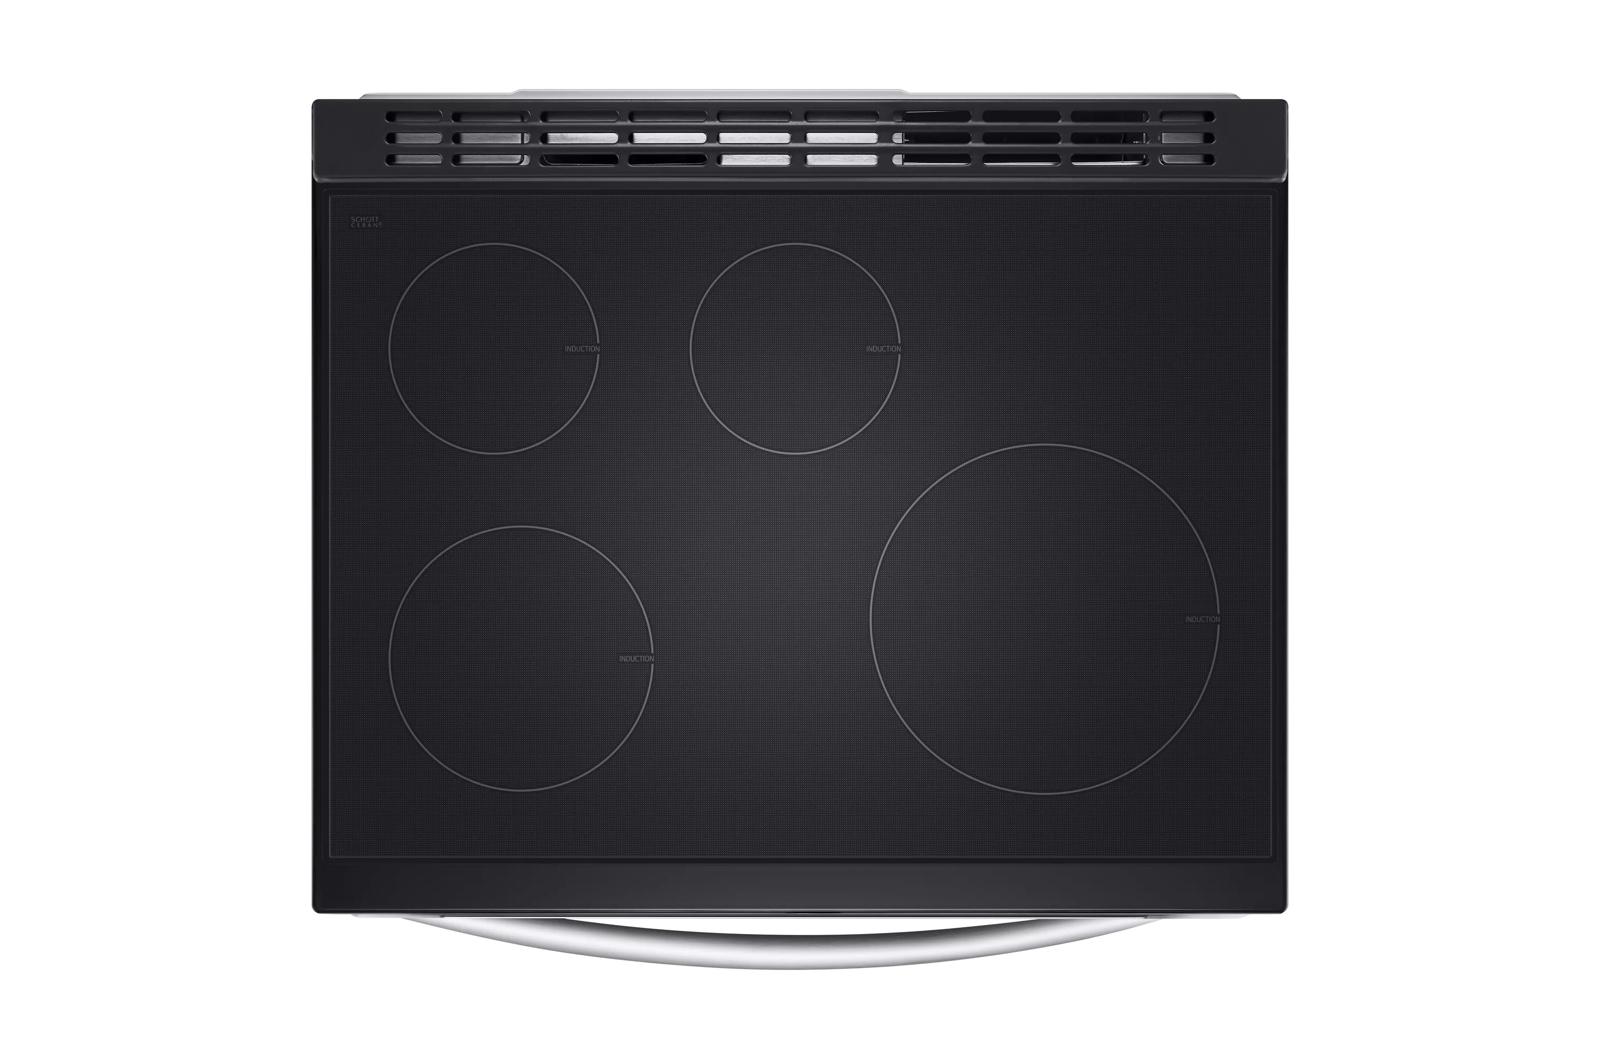 Lg 6.3 cu. ft. Smart Induction Slide-in Range with Convection and Air Fry